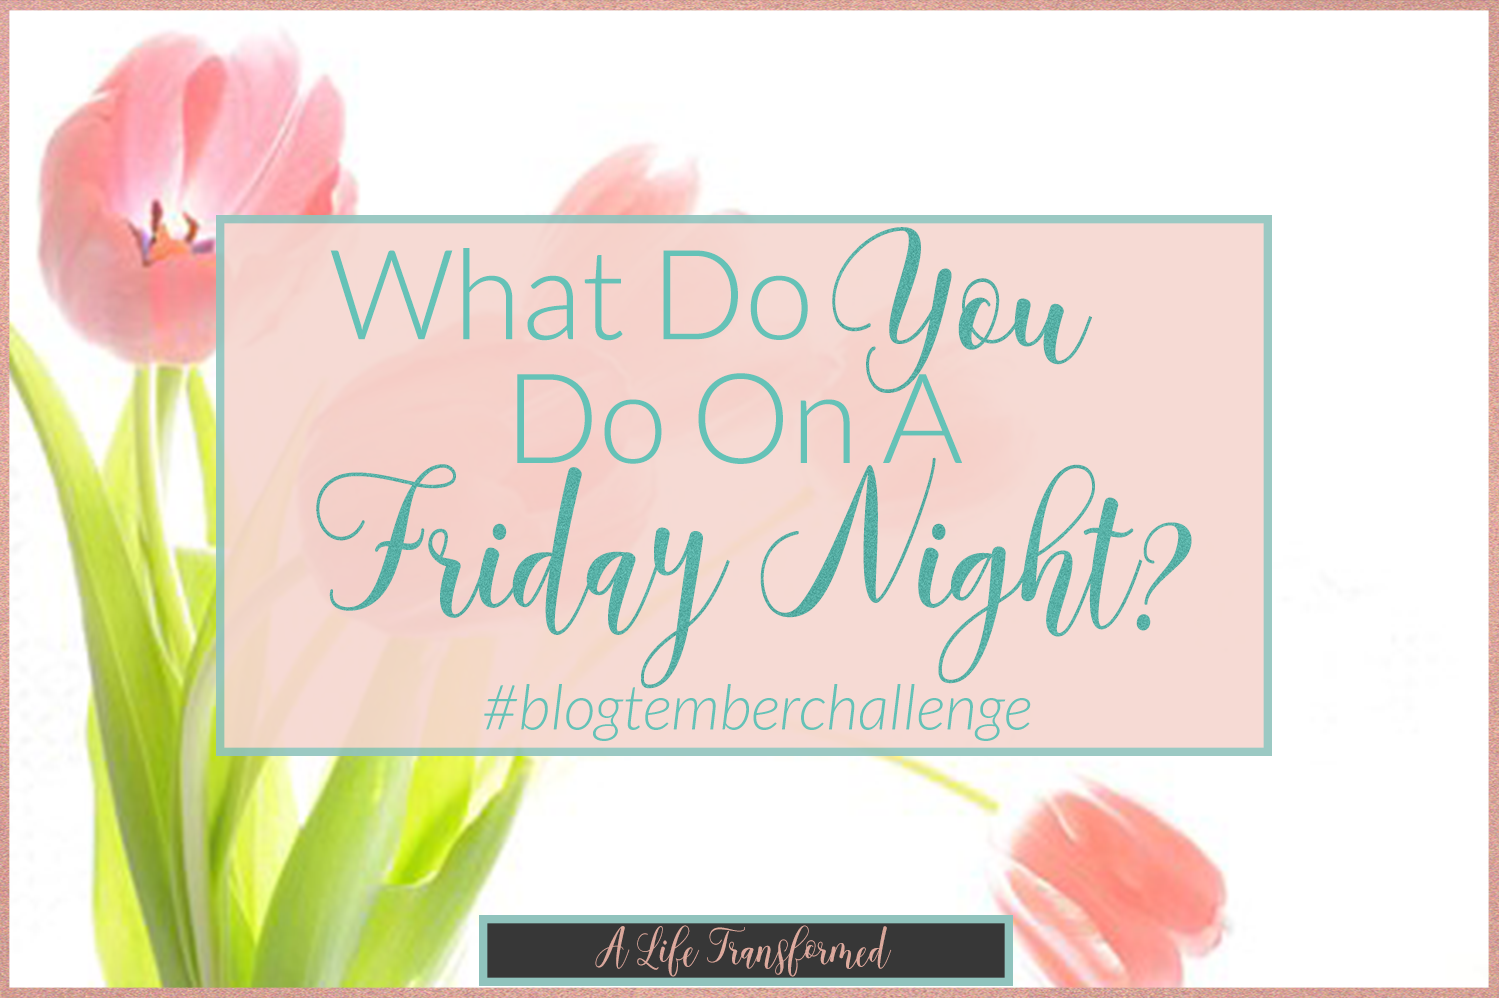 What-Do-You-Do-On-A-Friday-Night-blogtemberchallenge